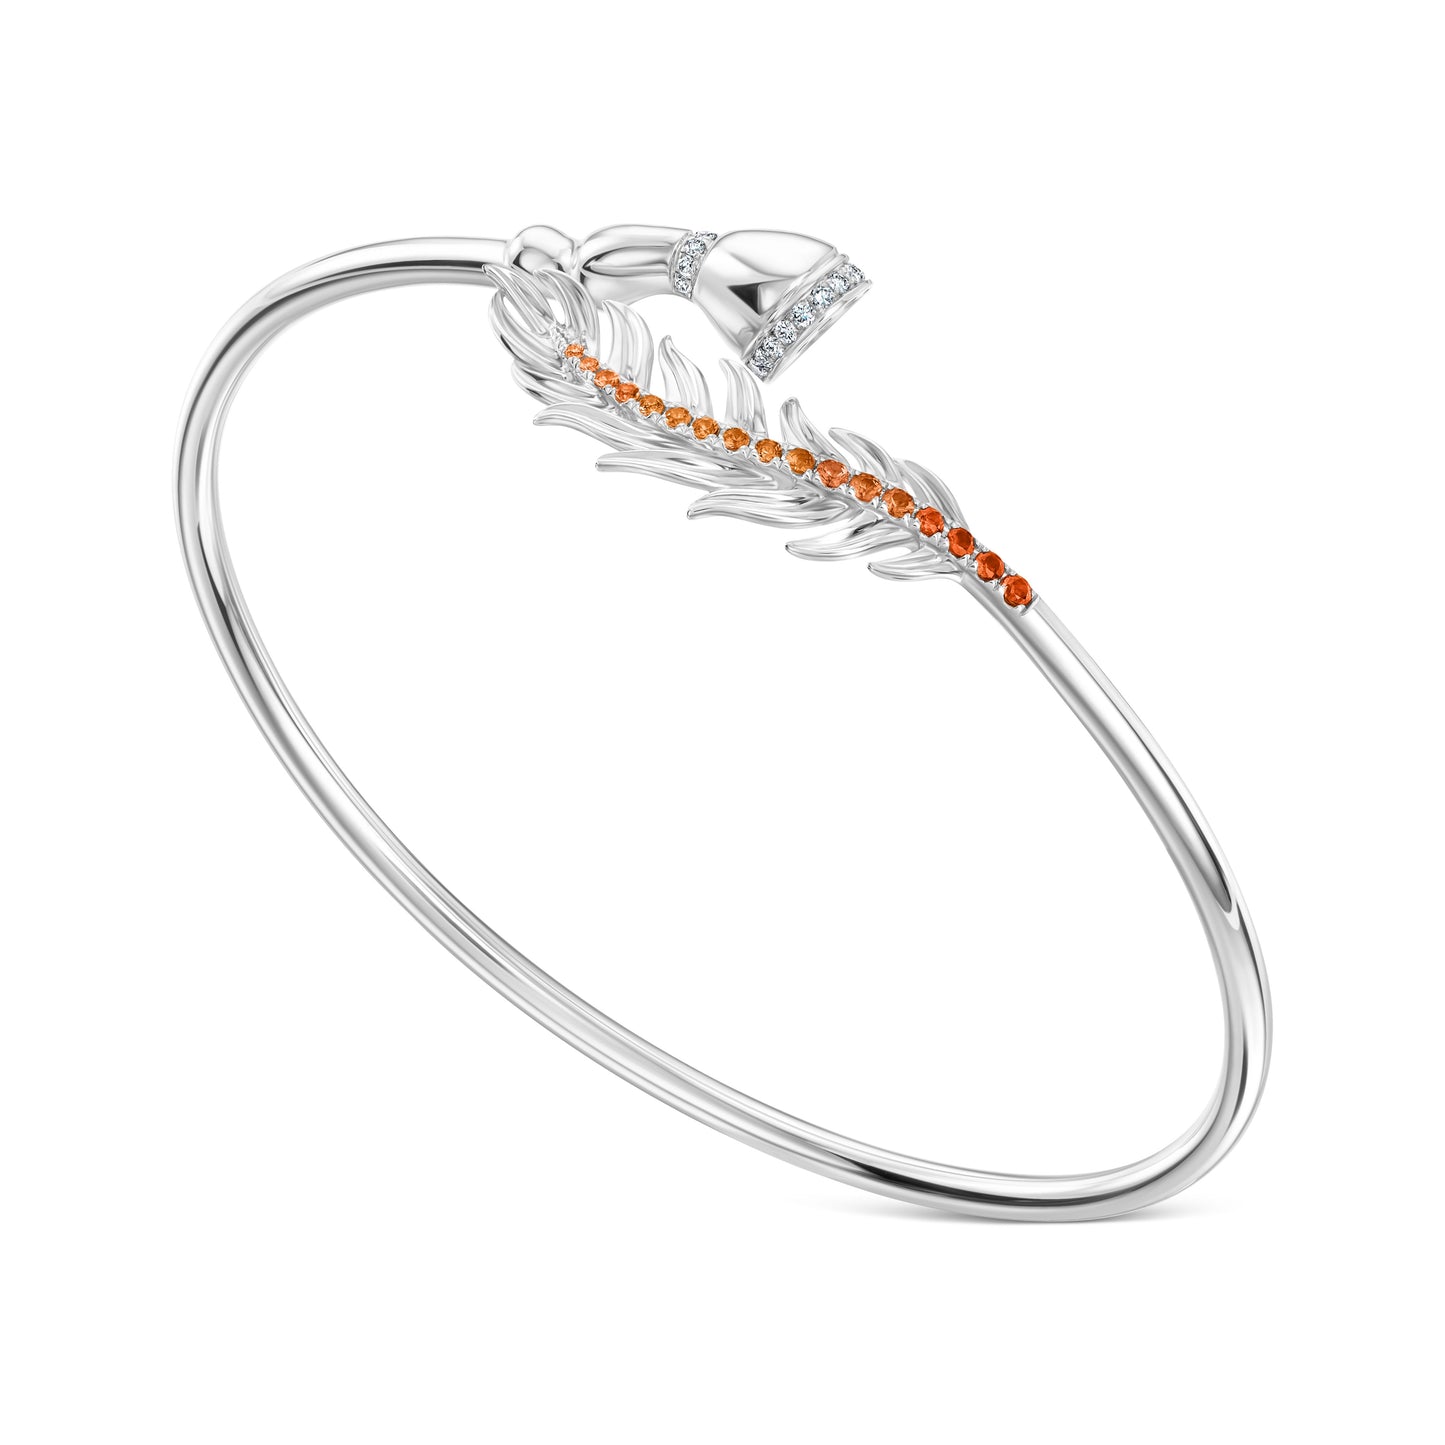 Fearless Feathers White Gold and Orange Sapphires Bracelet